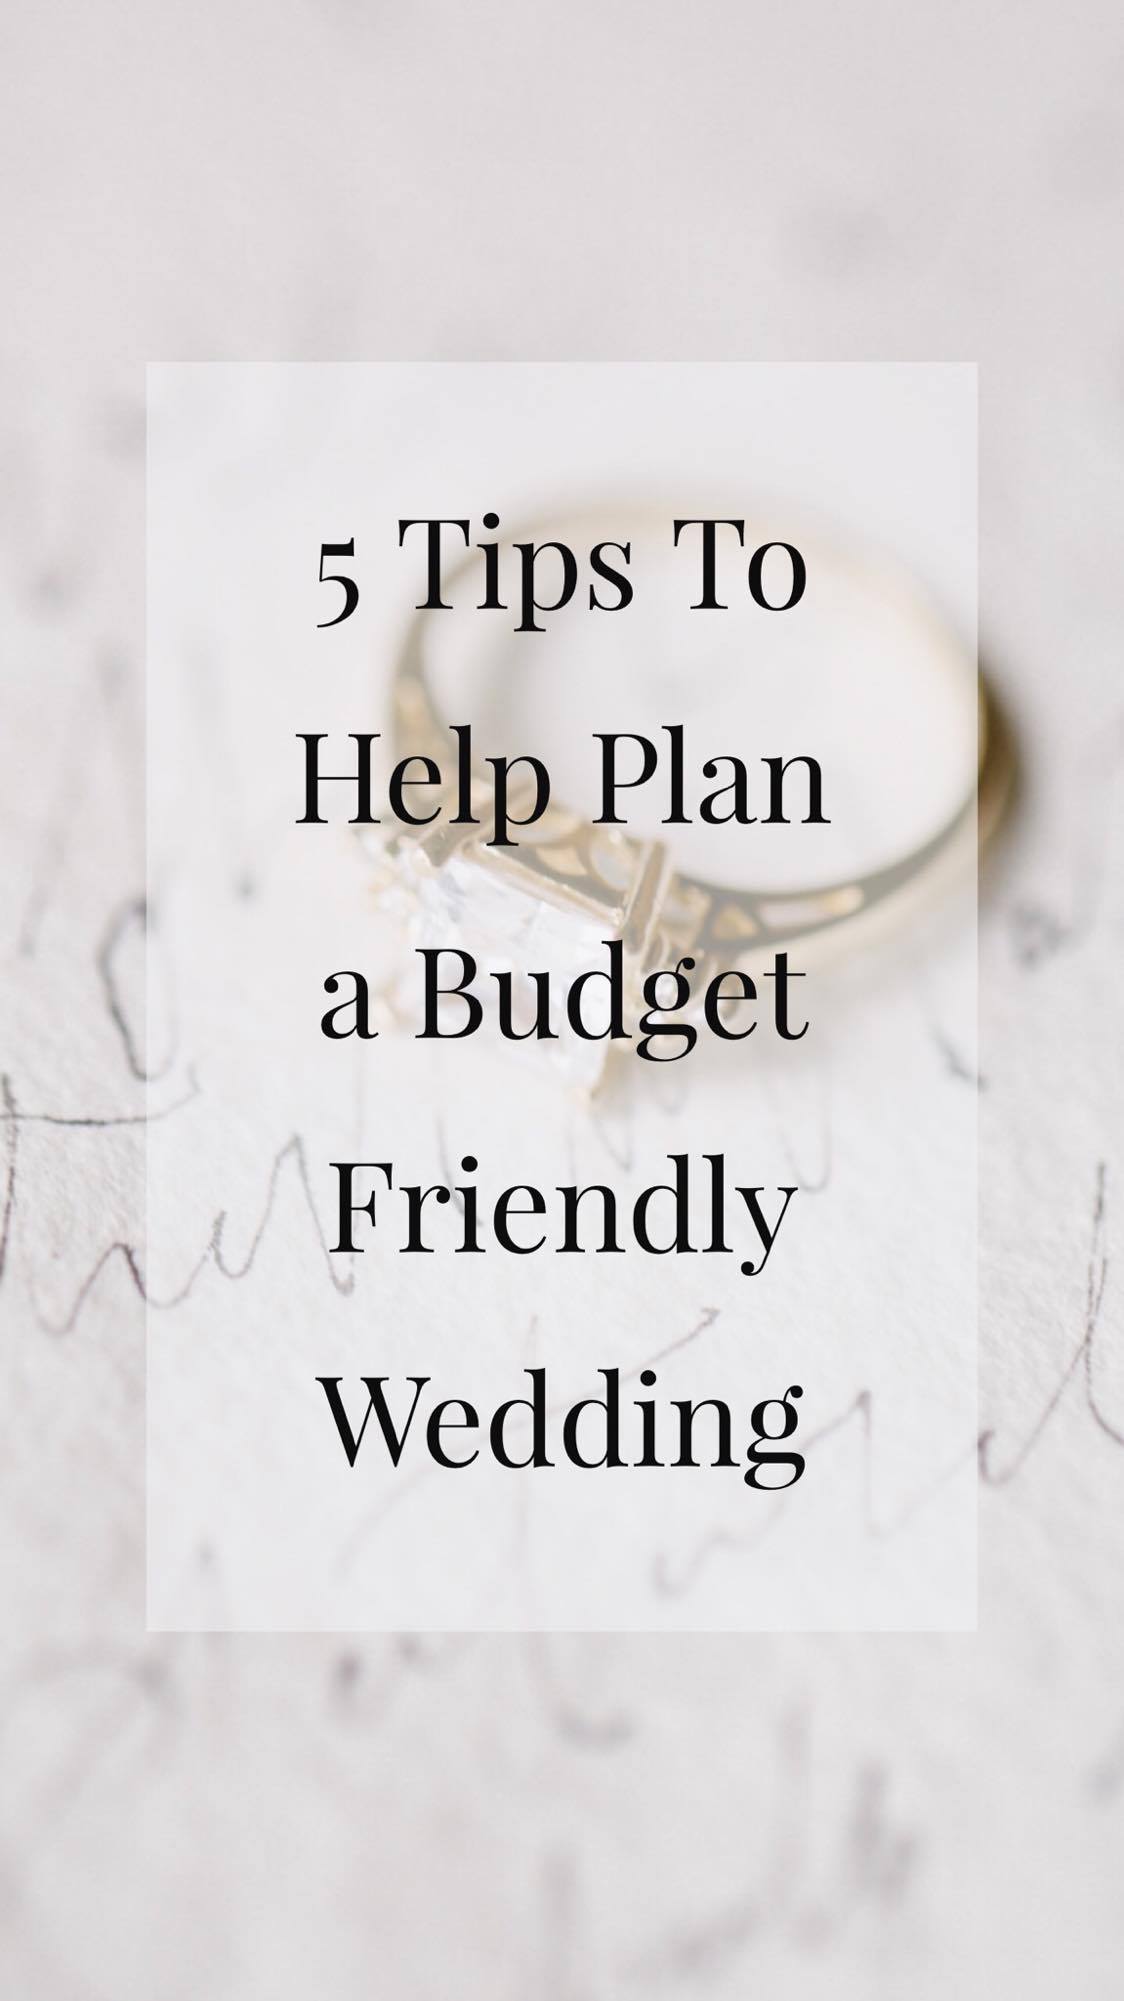 5 tips to plan a budget friendly wedding